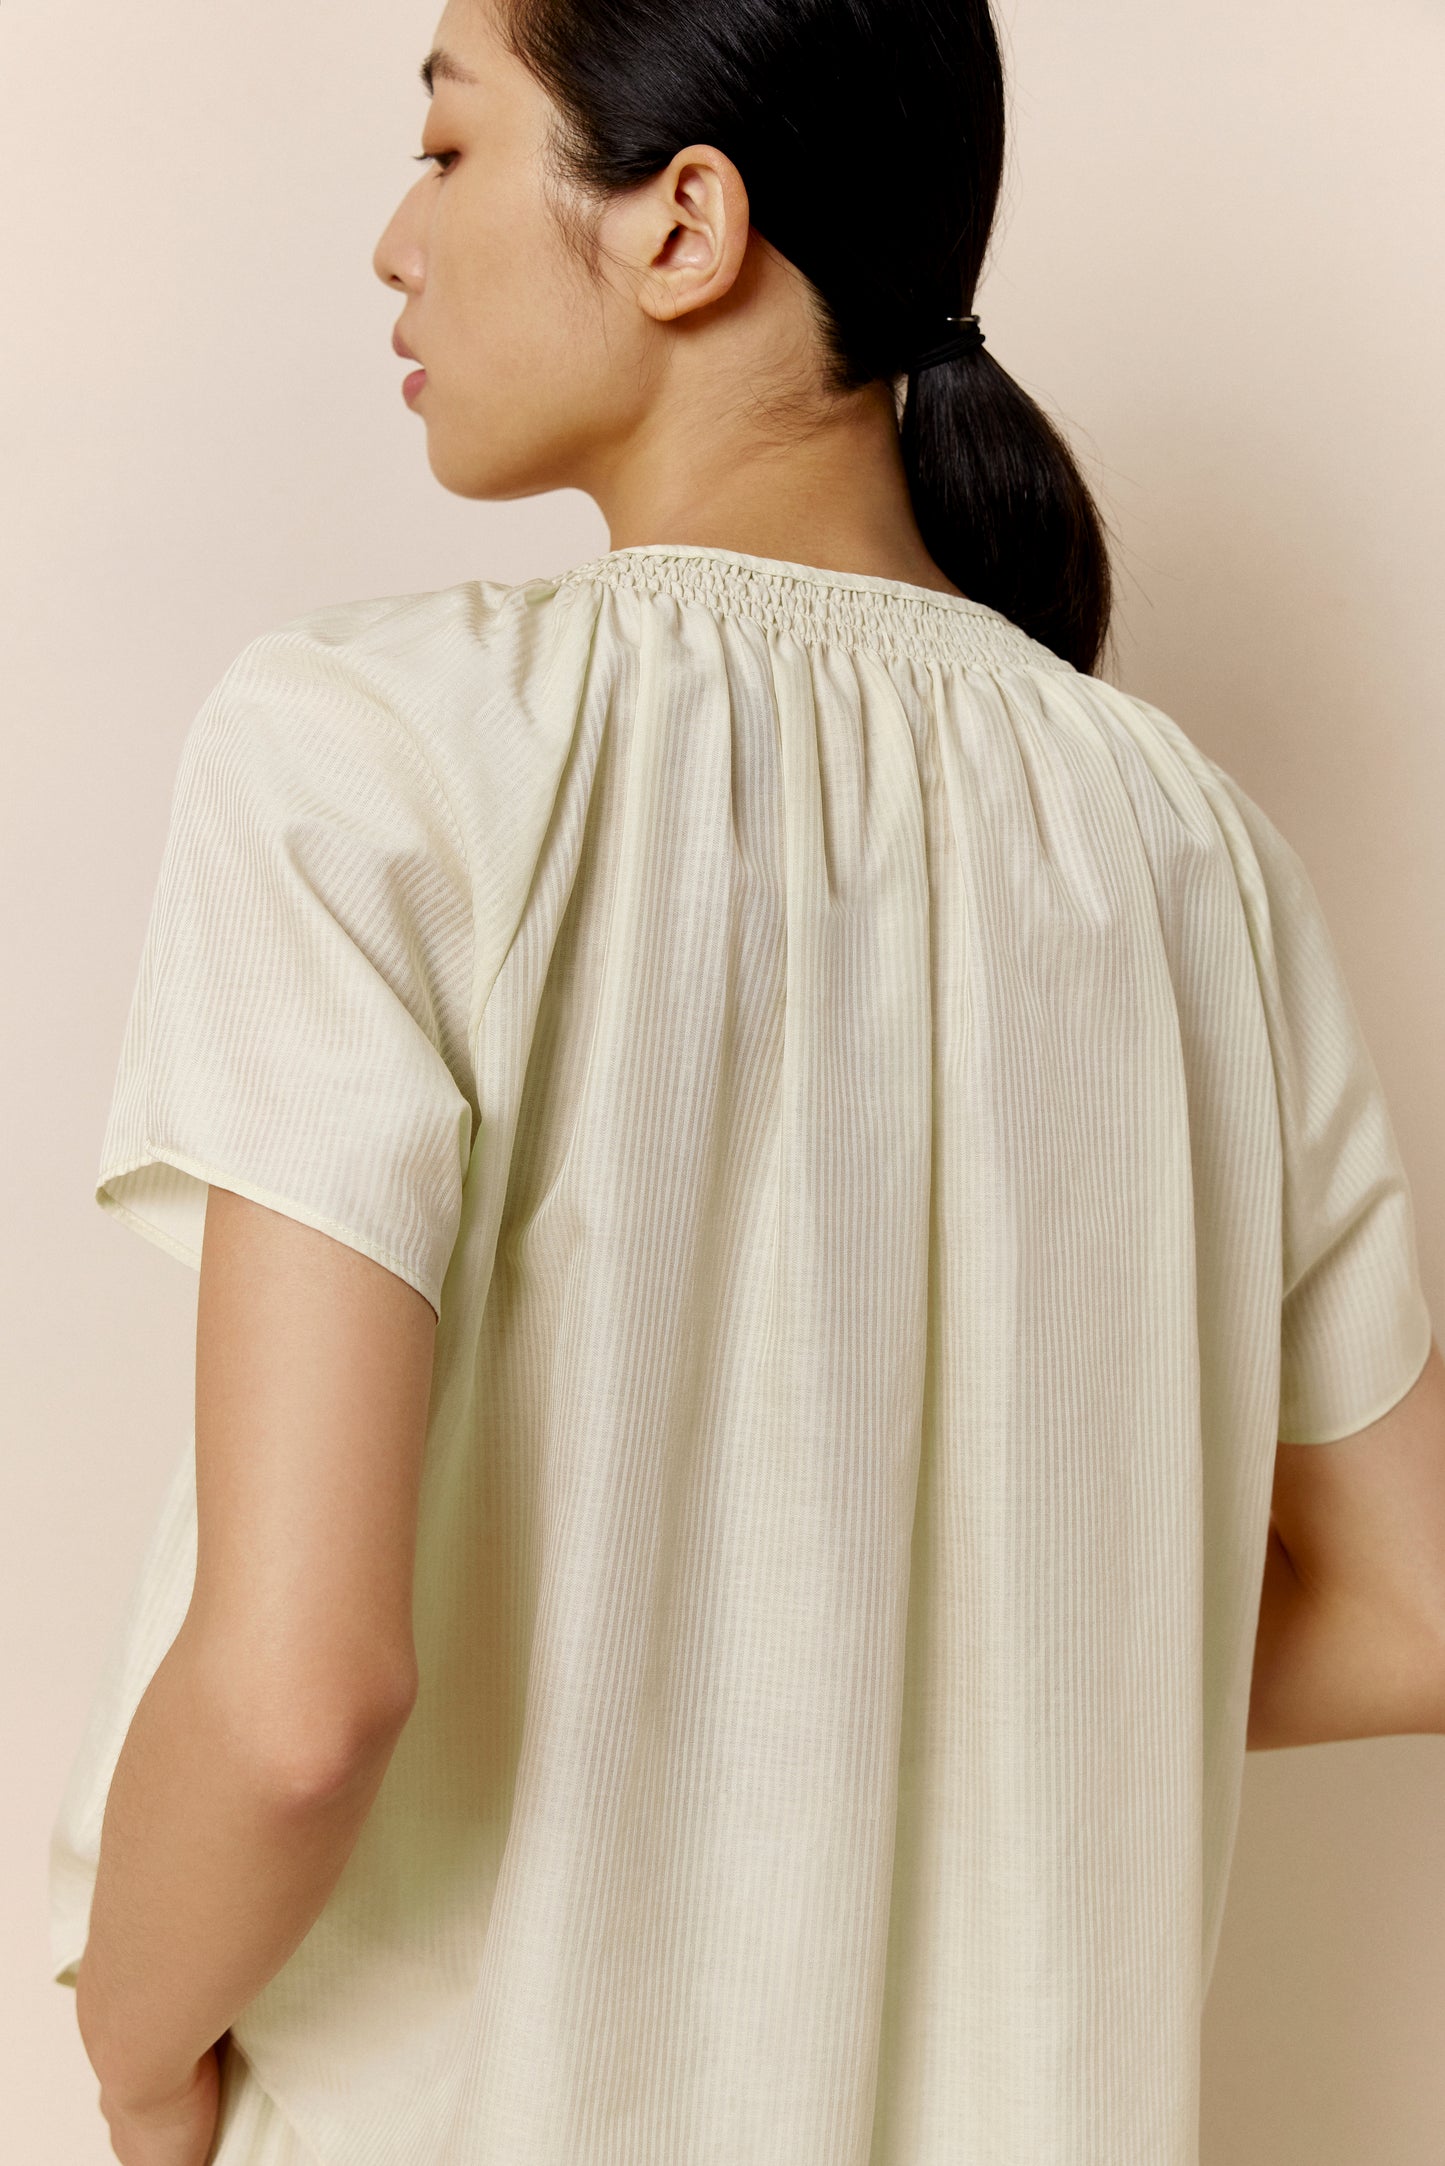 A woman wears off-white pajama top.